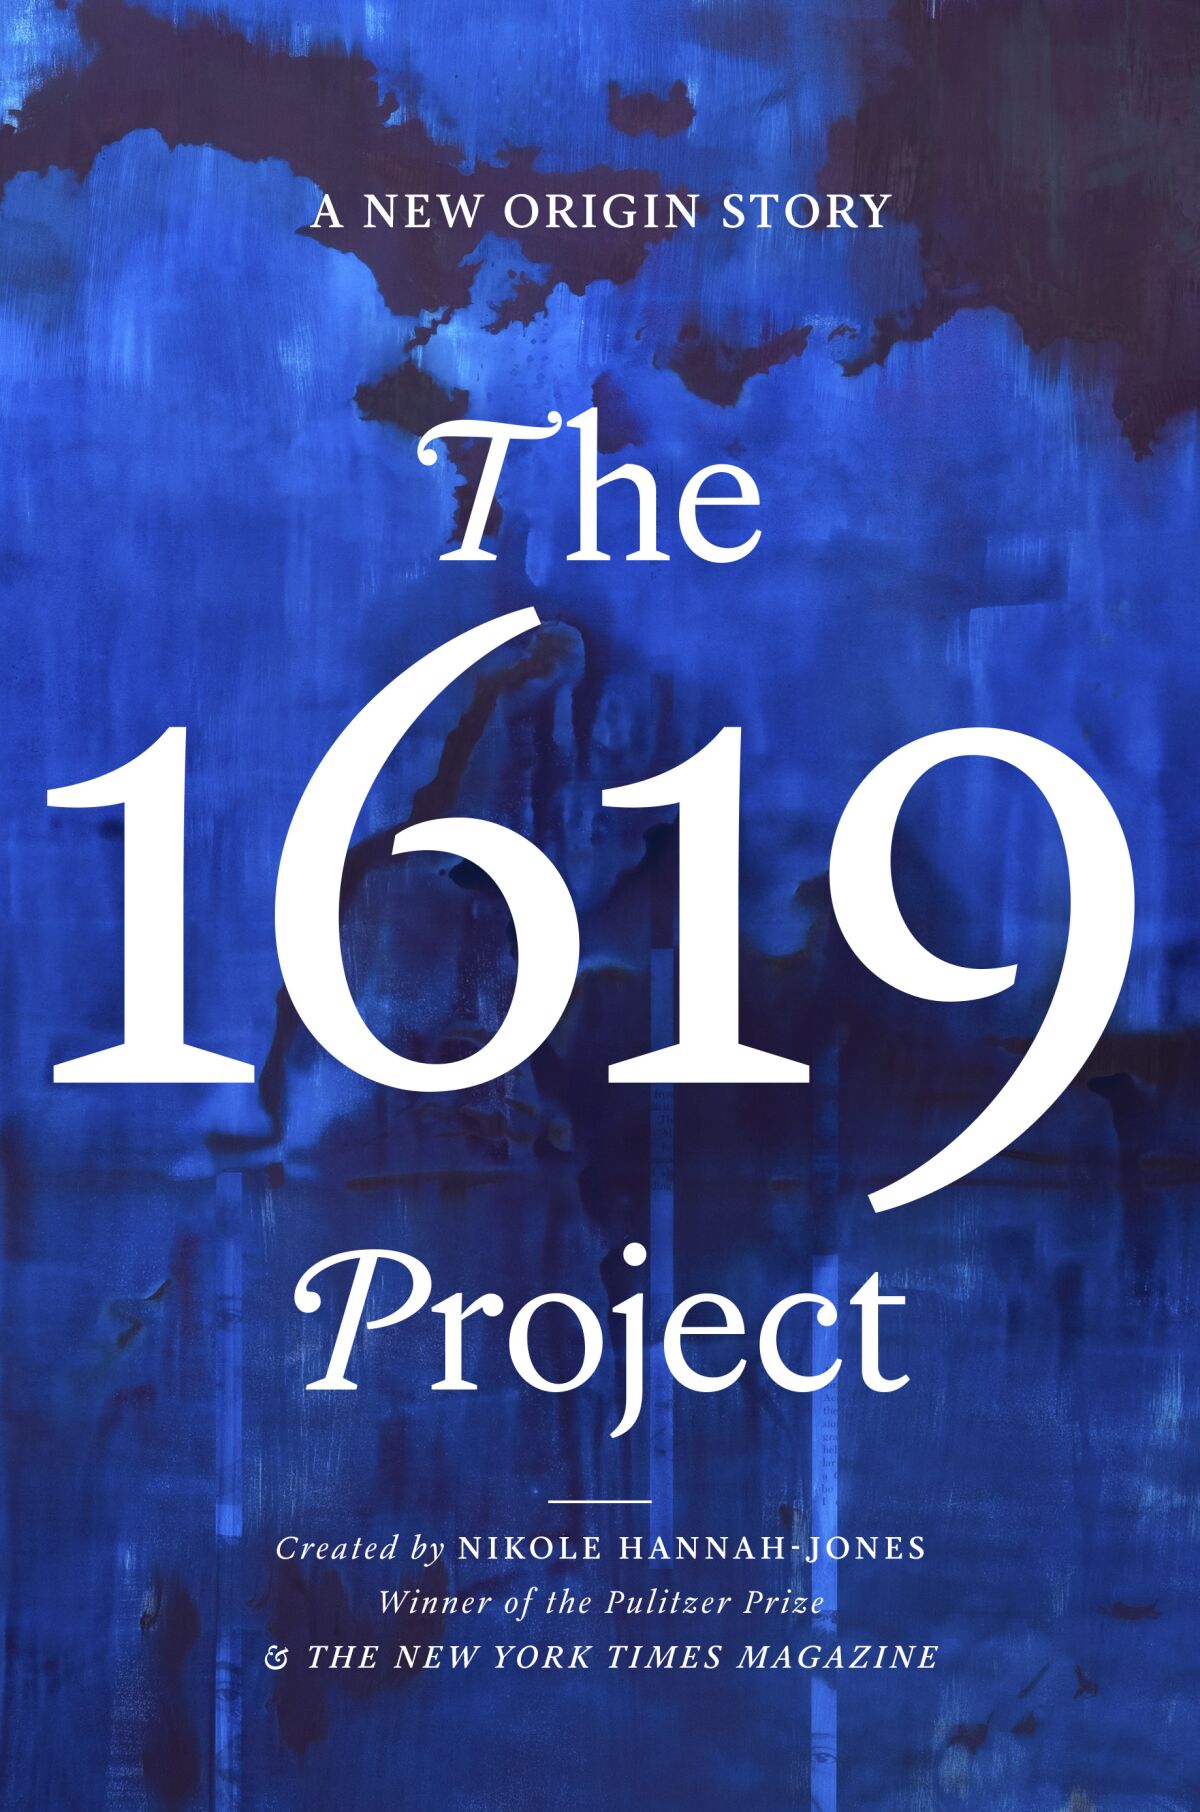 Book jacket for "The 1619 Project" created by Nikole Hannah-Jones.